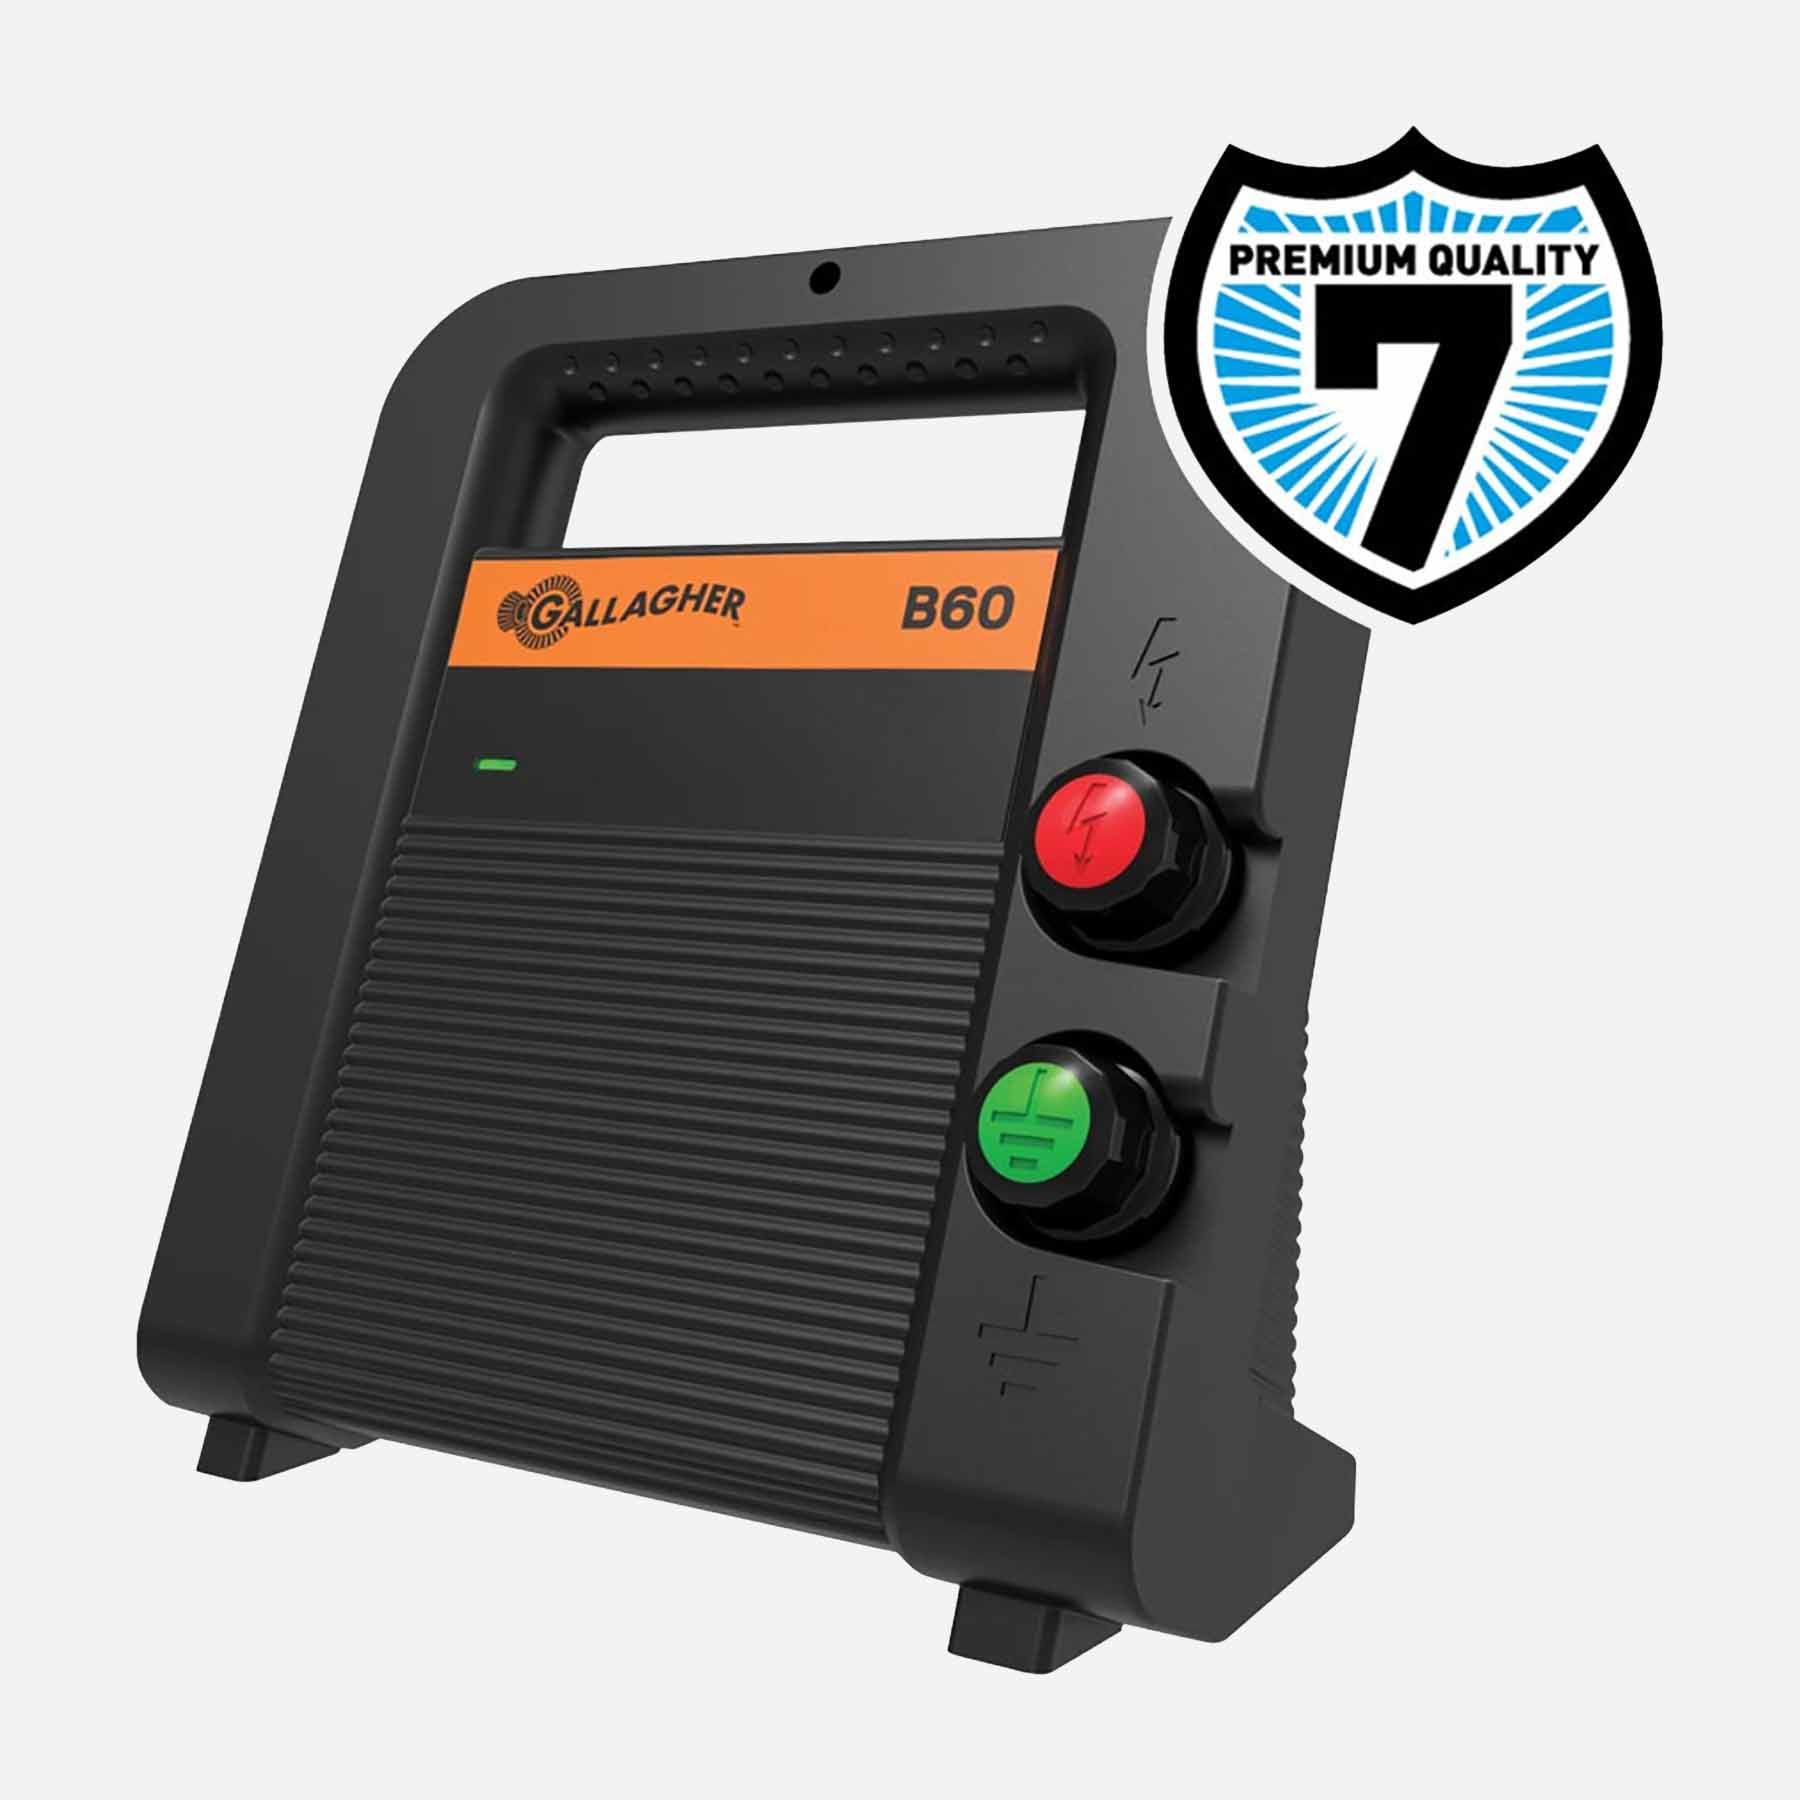 Gallagher Portable Battery Fence Energizer B60 (for a battery)